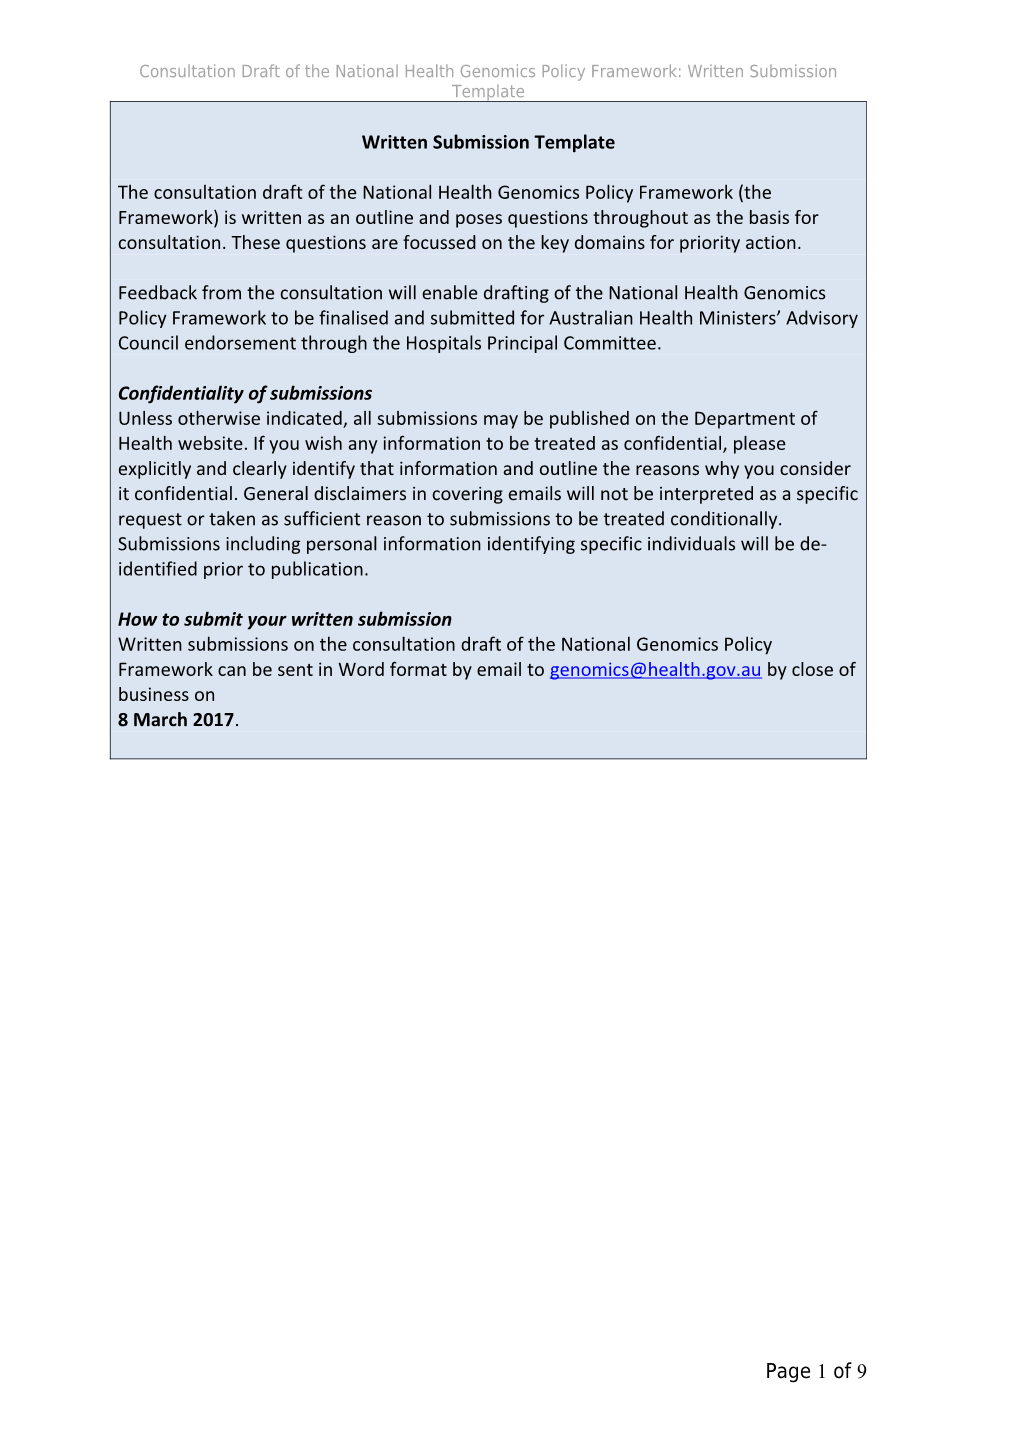 Consultation Draft of the National Health Genomics Policy Framework: Written Submission Template